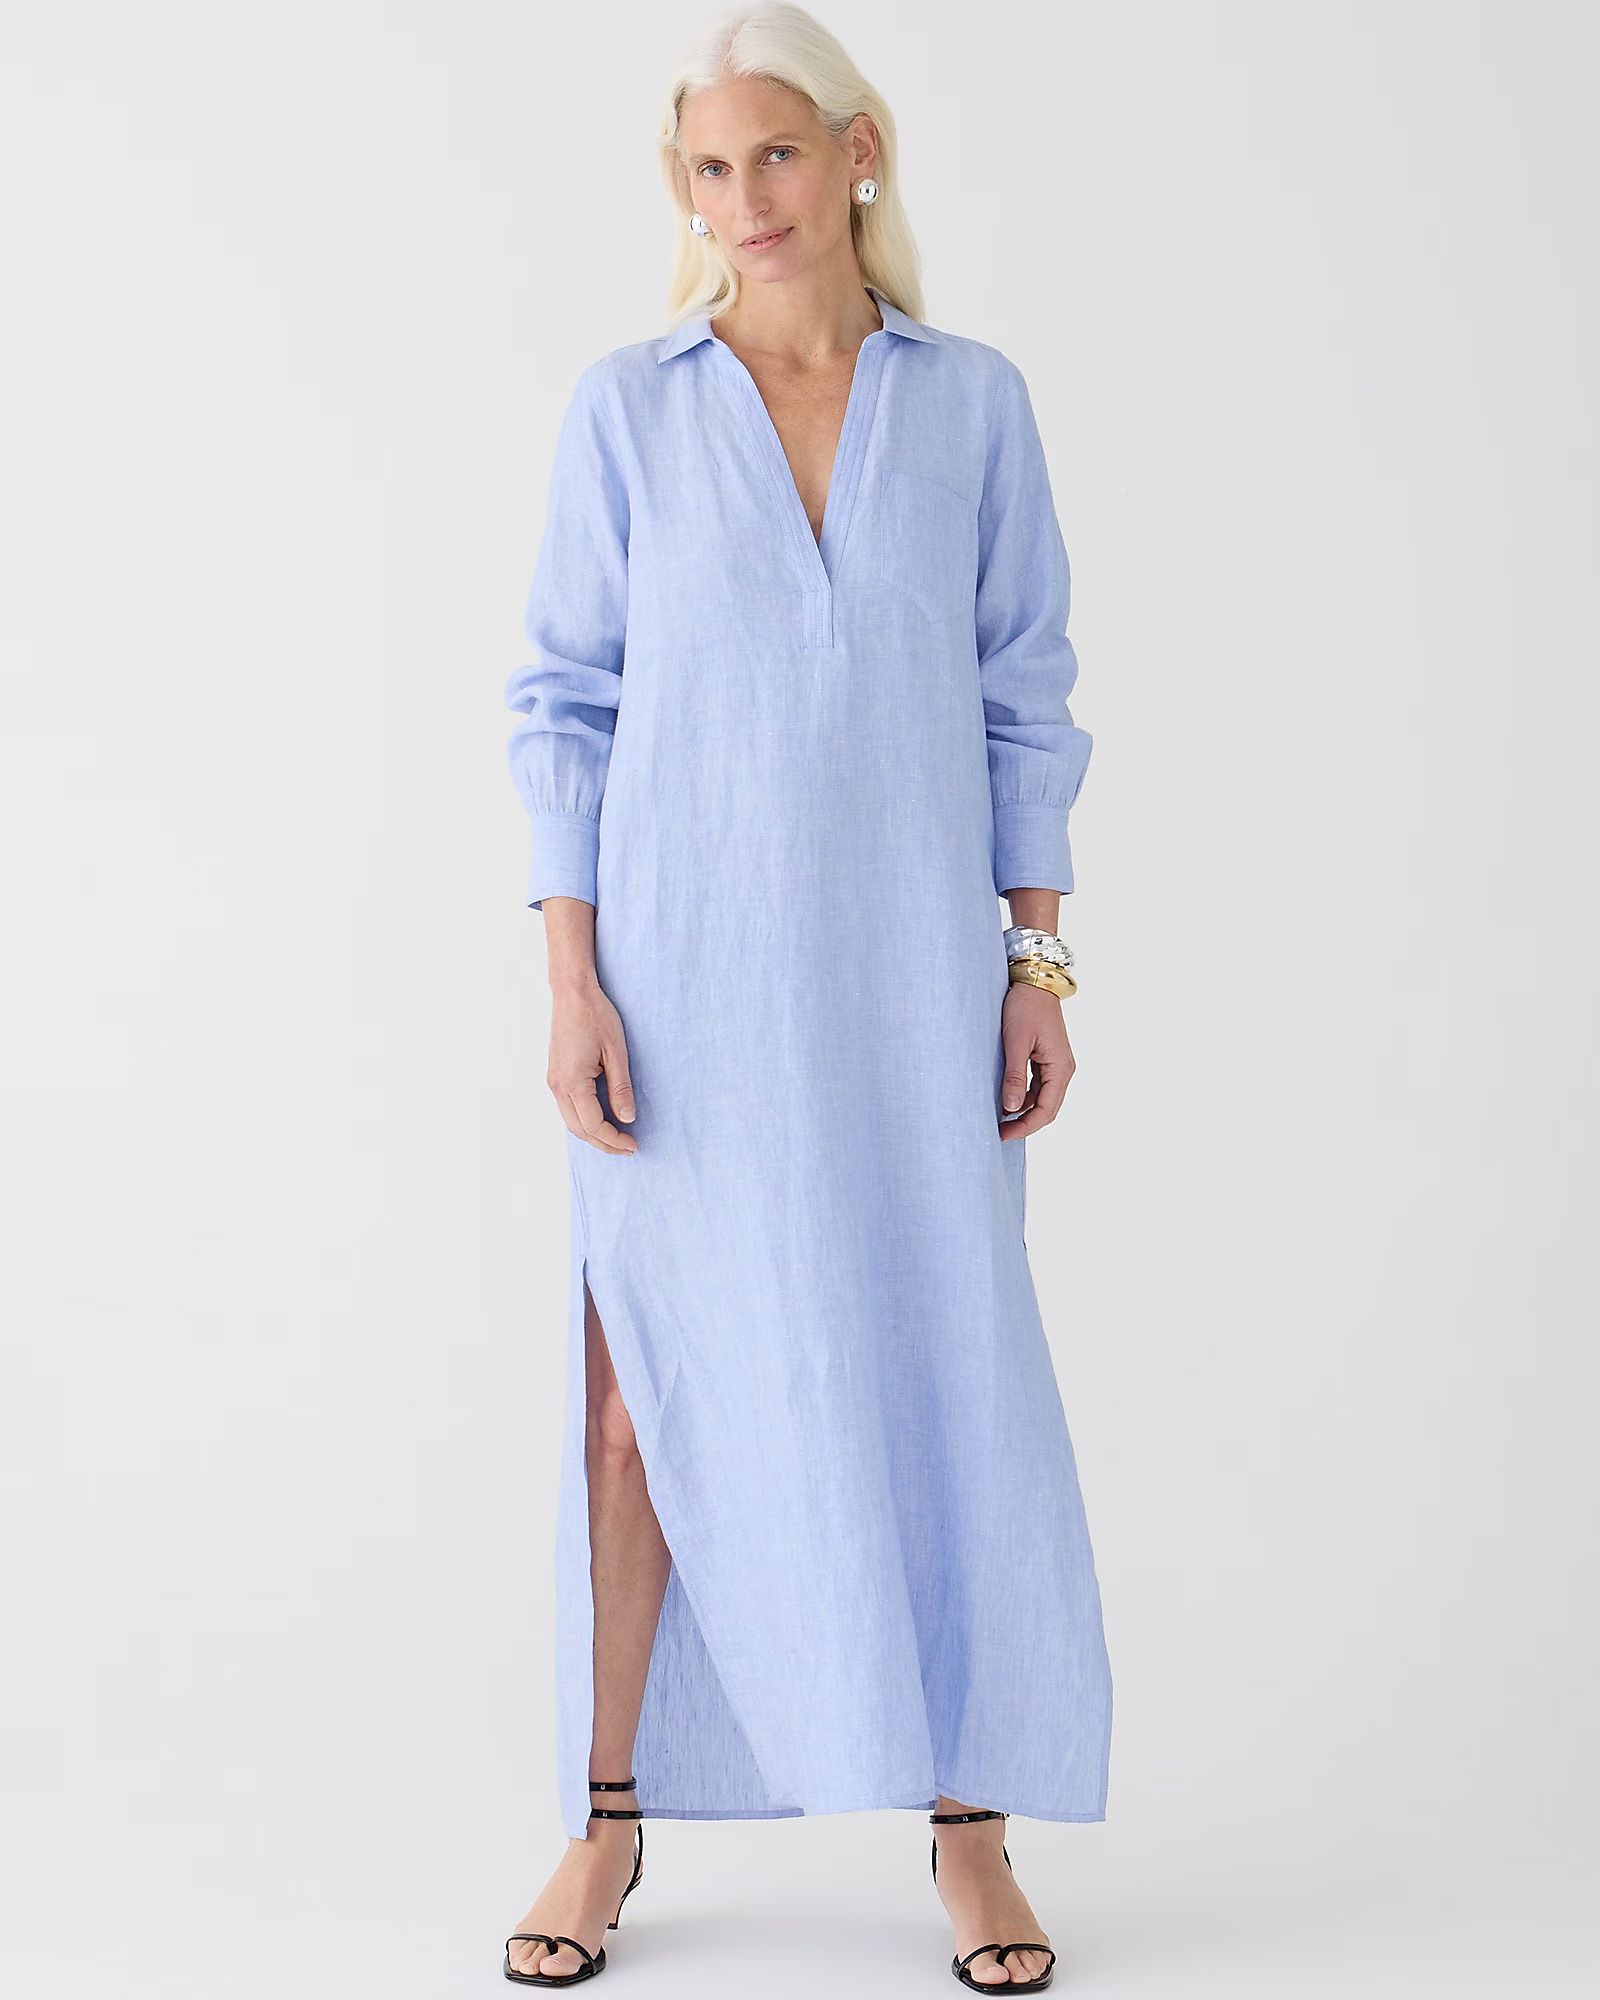 best sellerBungalow maxi popover dress in linenFrench Blue$148.00$158.00$94.50  Ship to homePick ... | J.Crew US